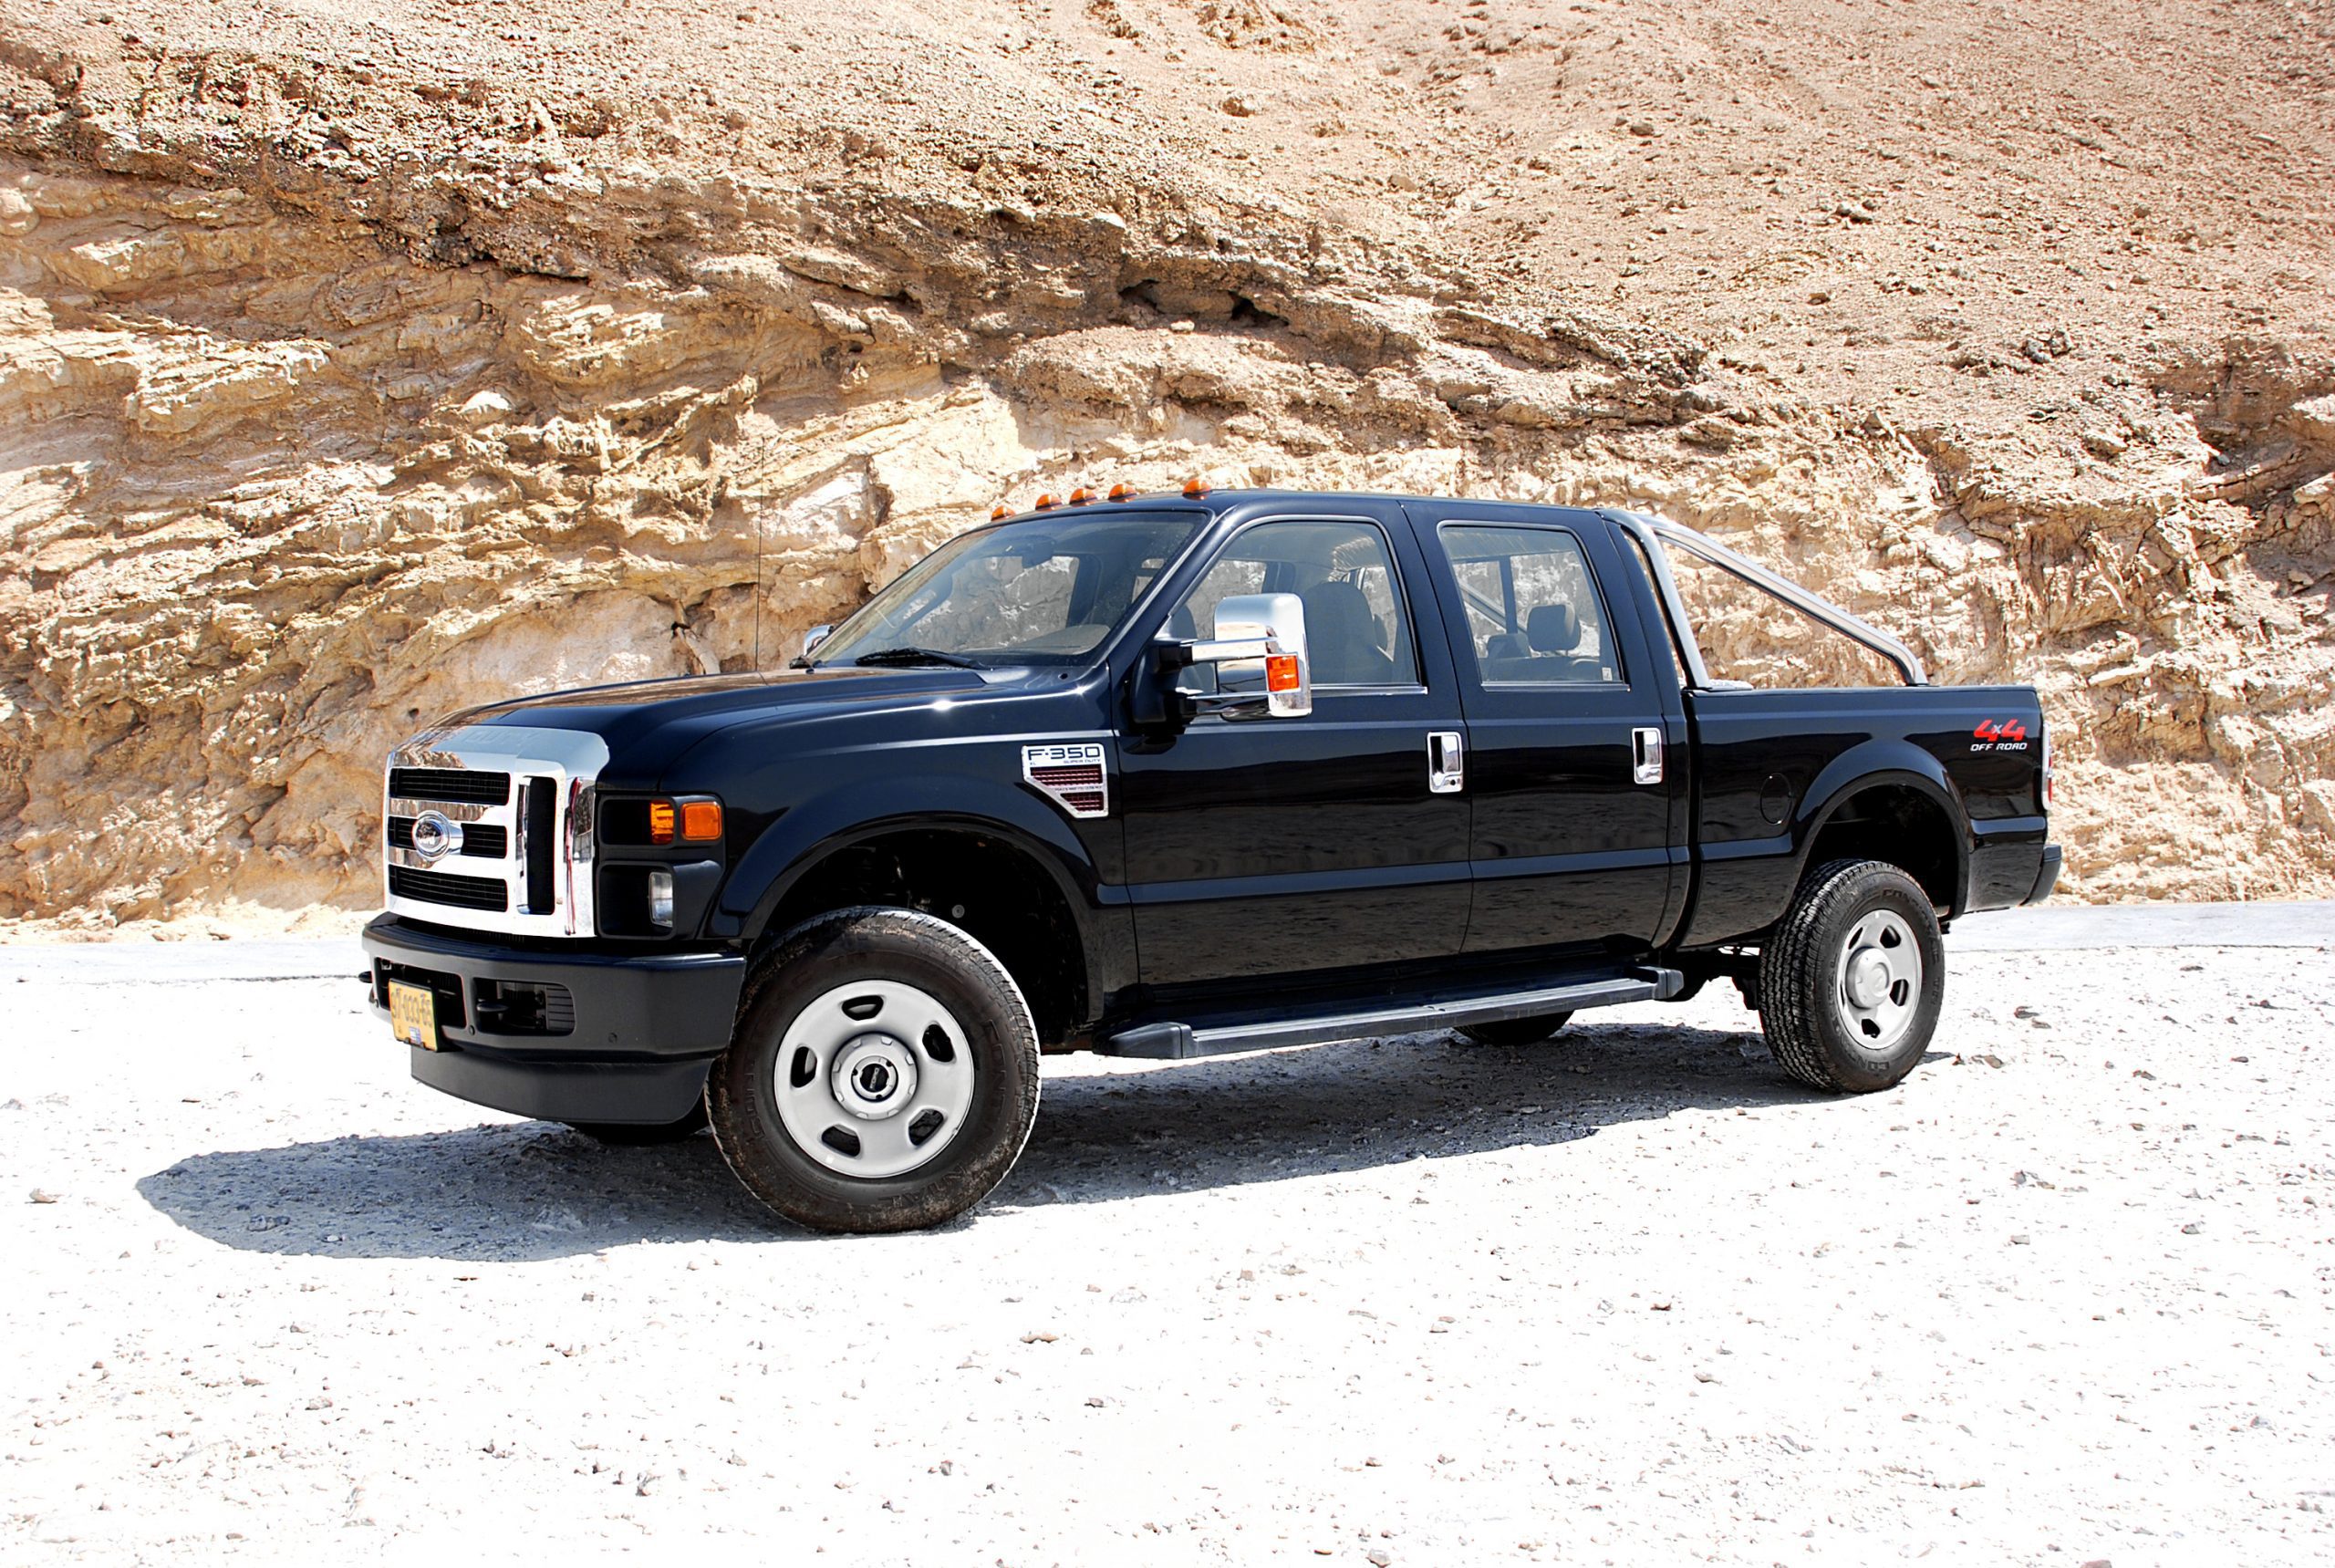 Lawsuit claims Ford misstated the towing capacity of F-350 trucks